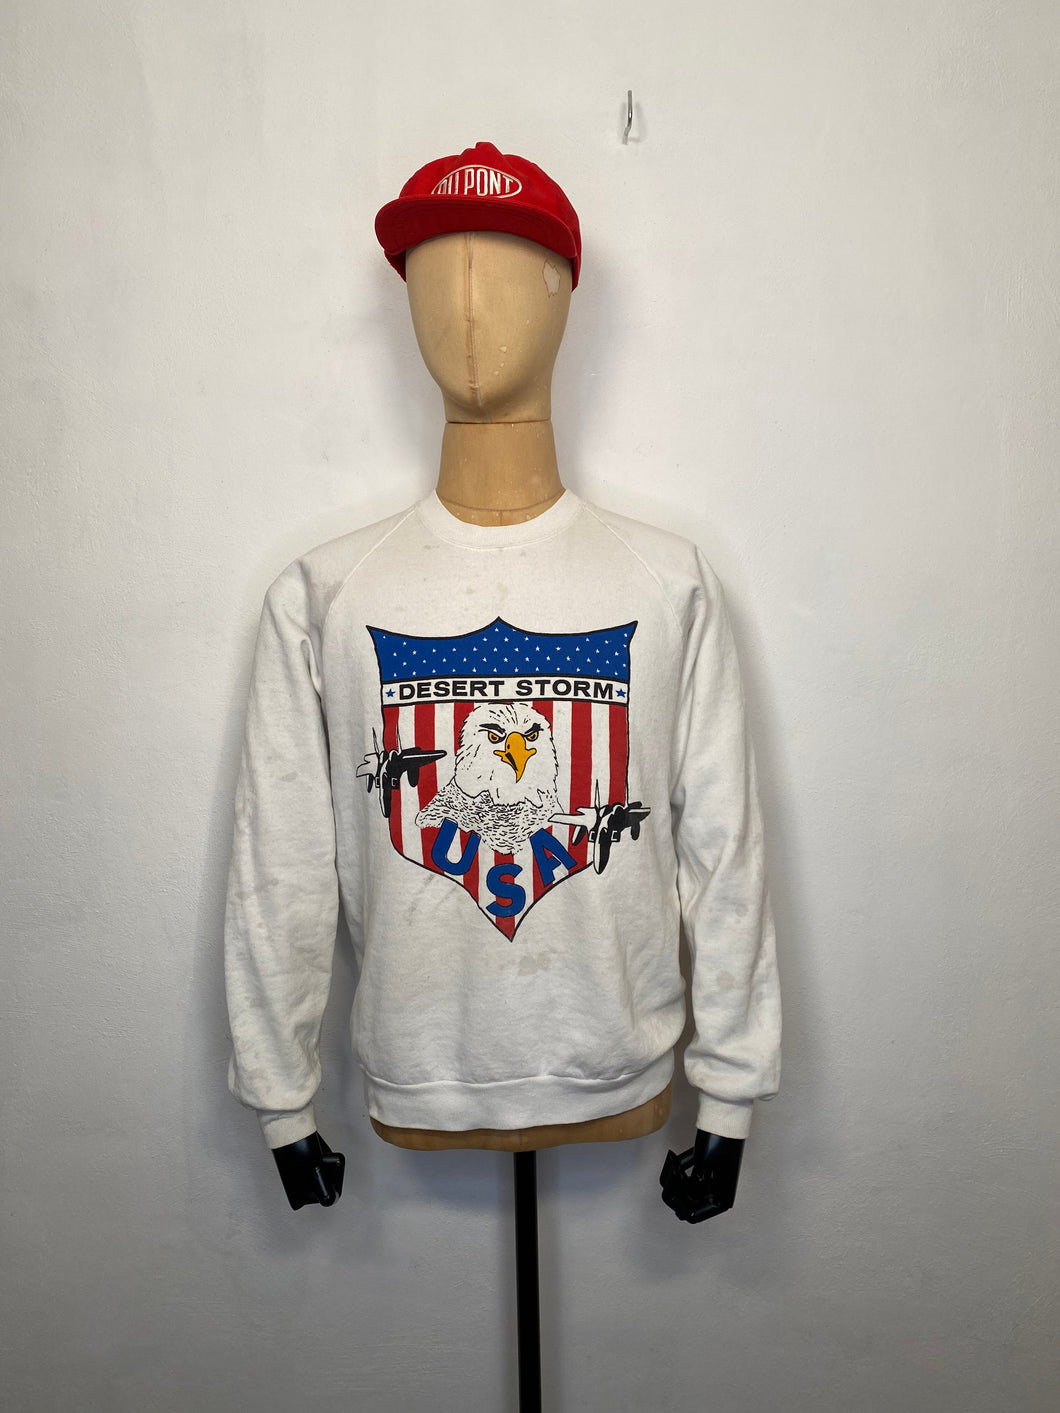 1990s Desert Storm sweater made in USA